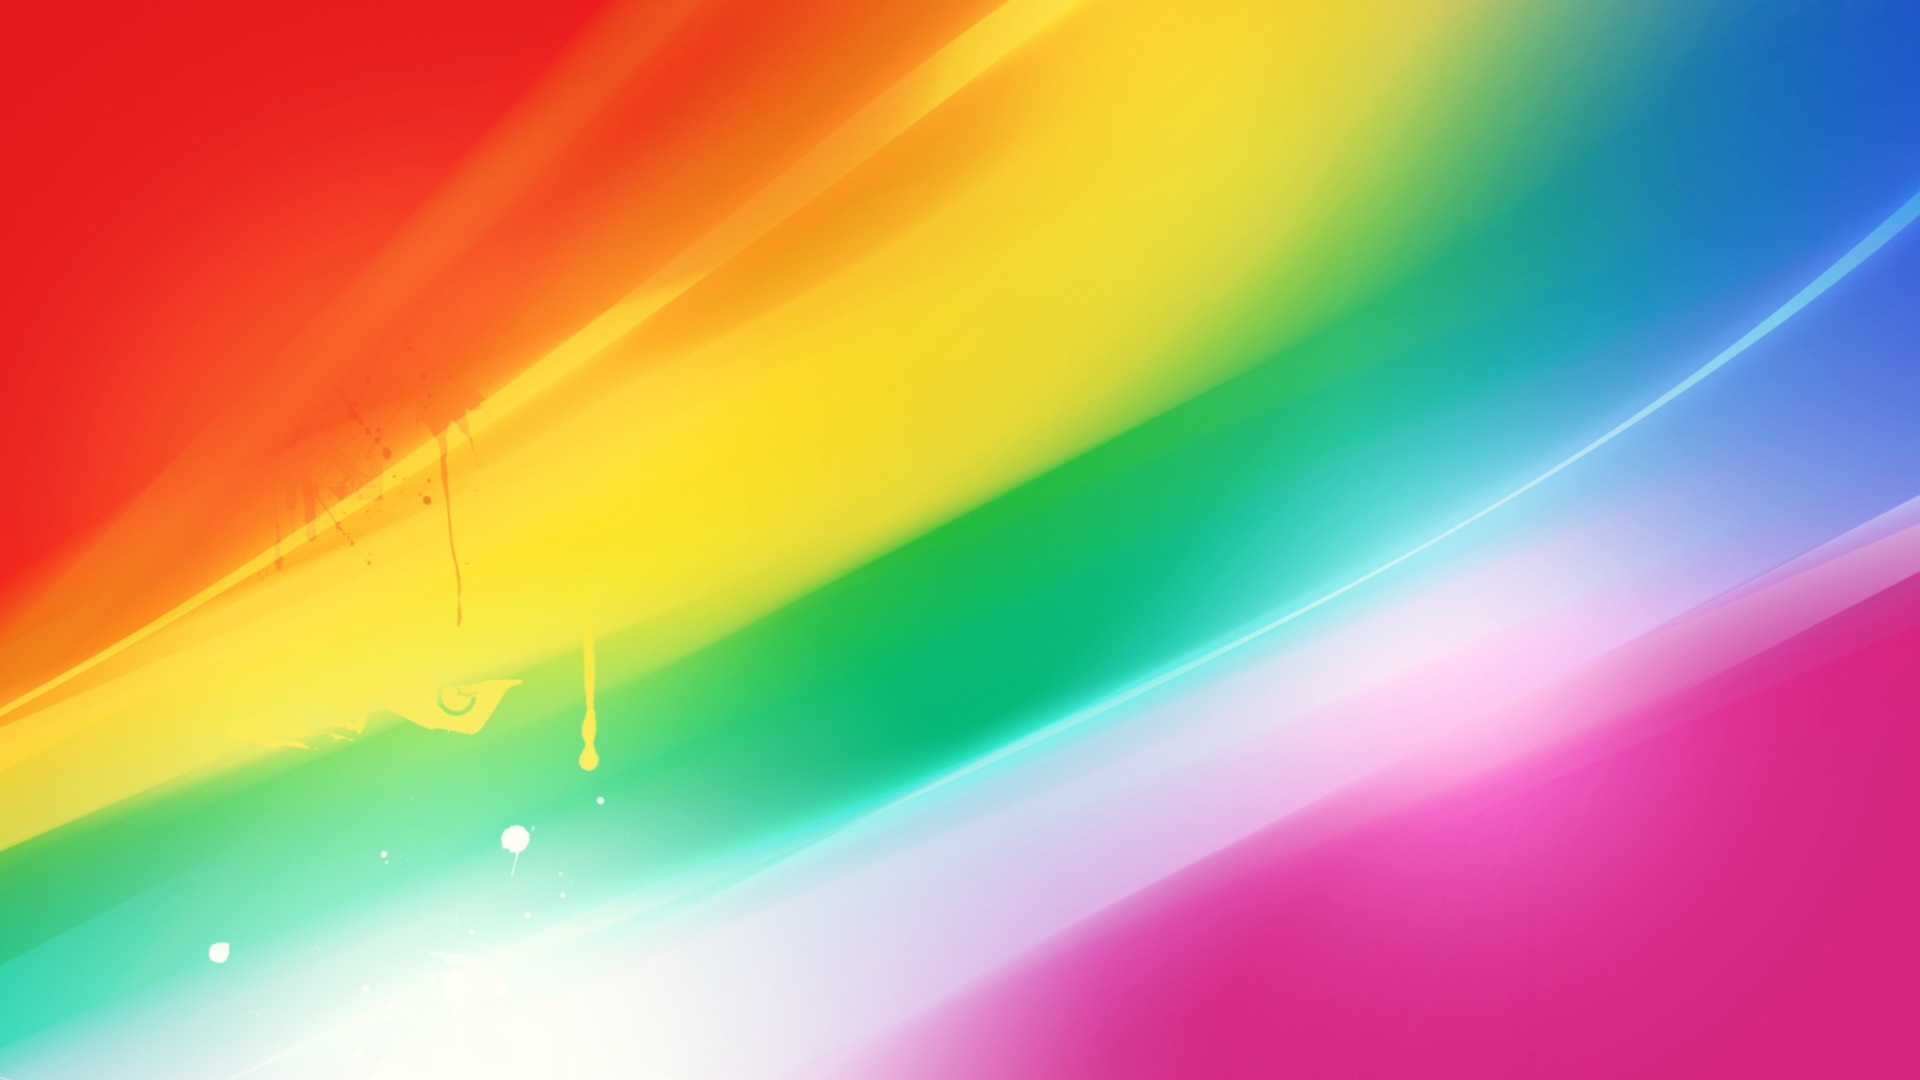 Colorful Abstraction wallpaper 1920x1080